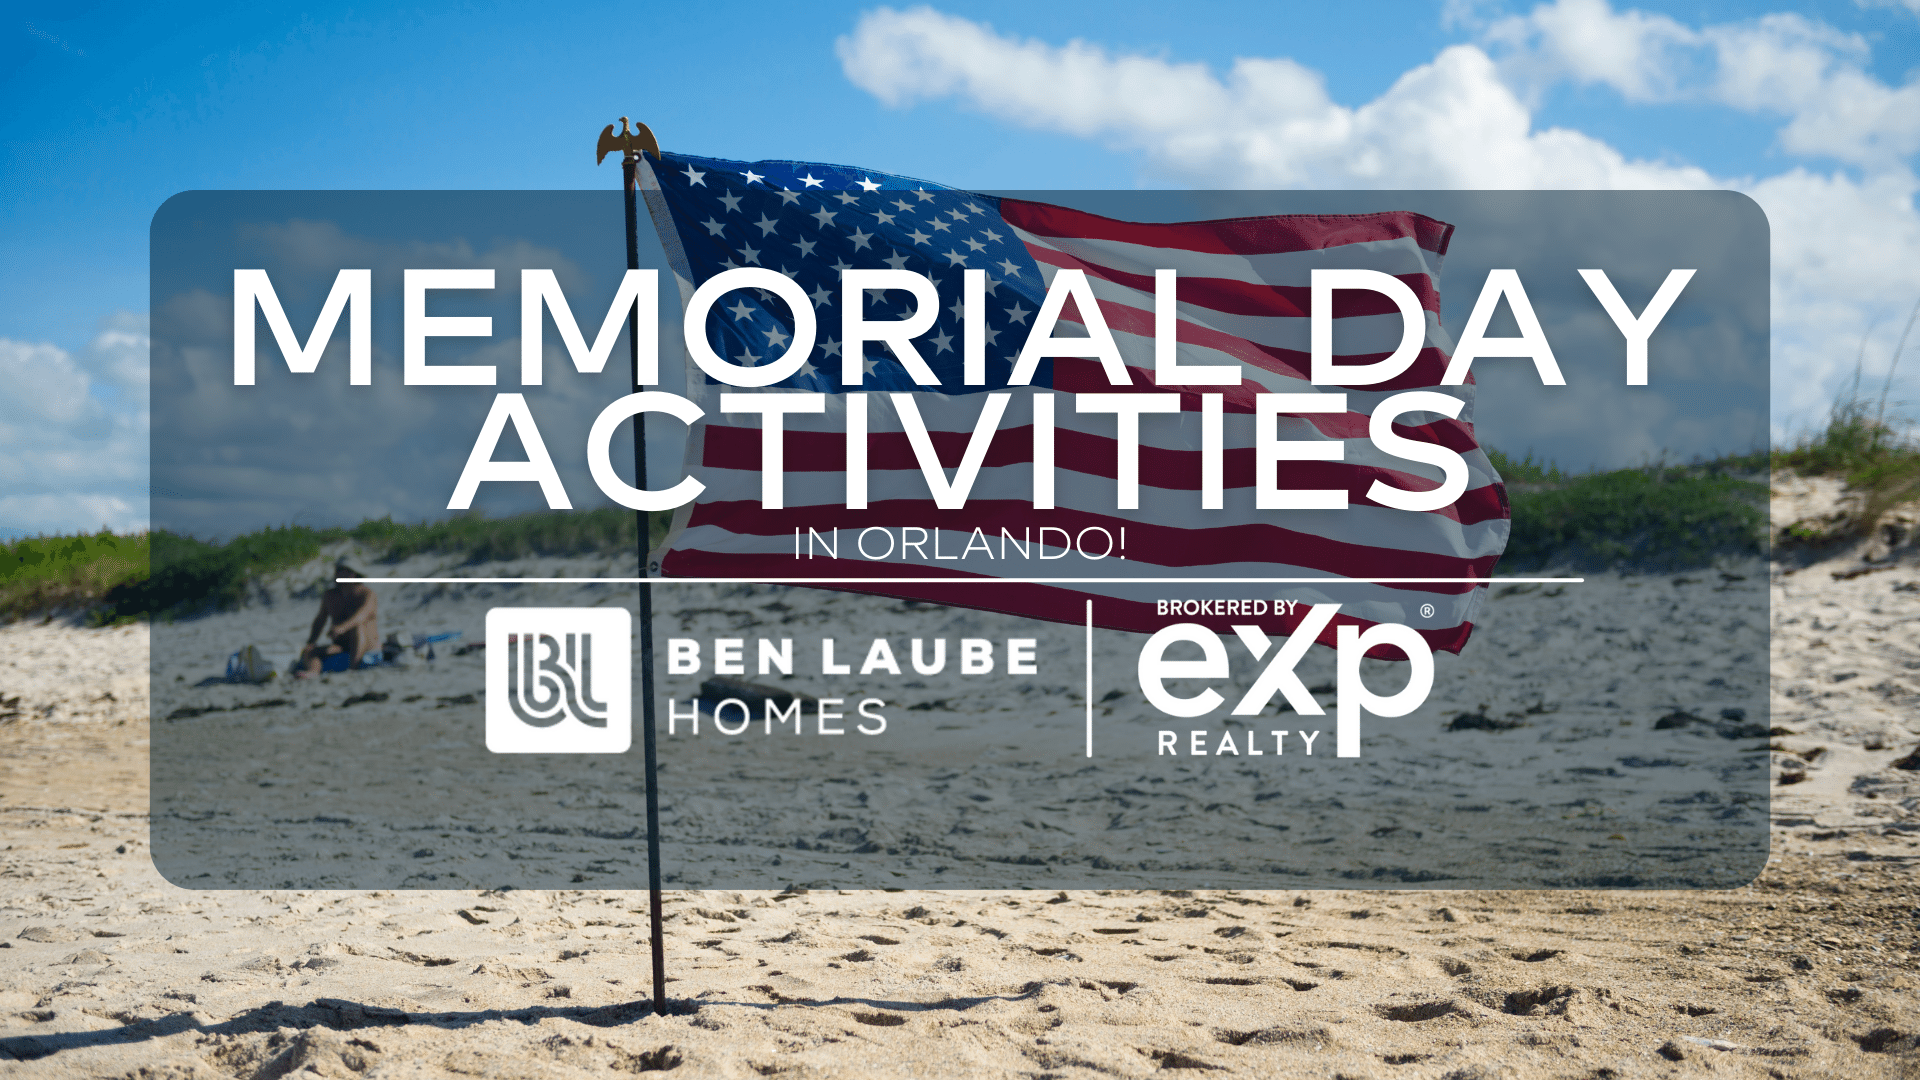 Featured image for “Memorial Day Activities in Orlando!”